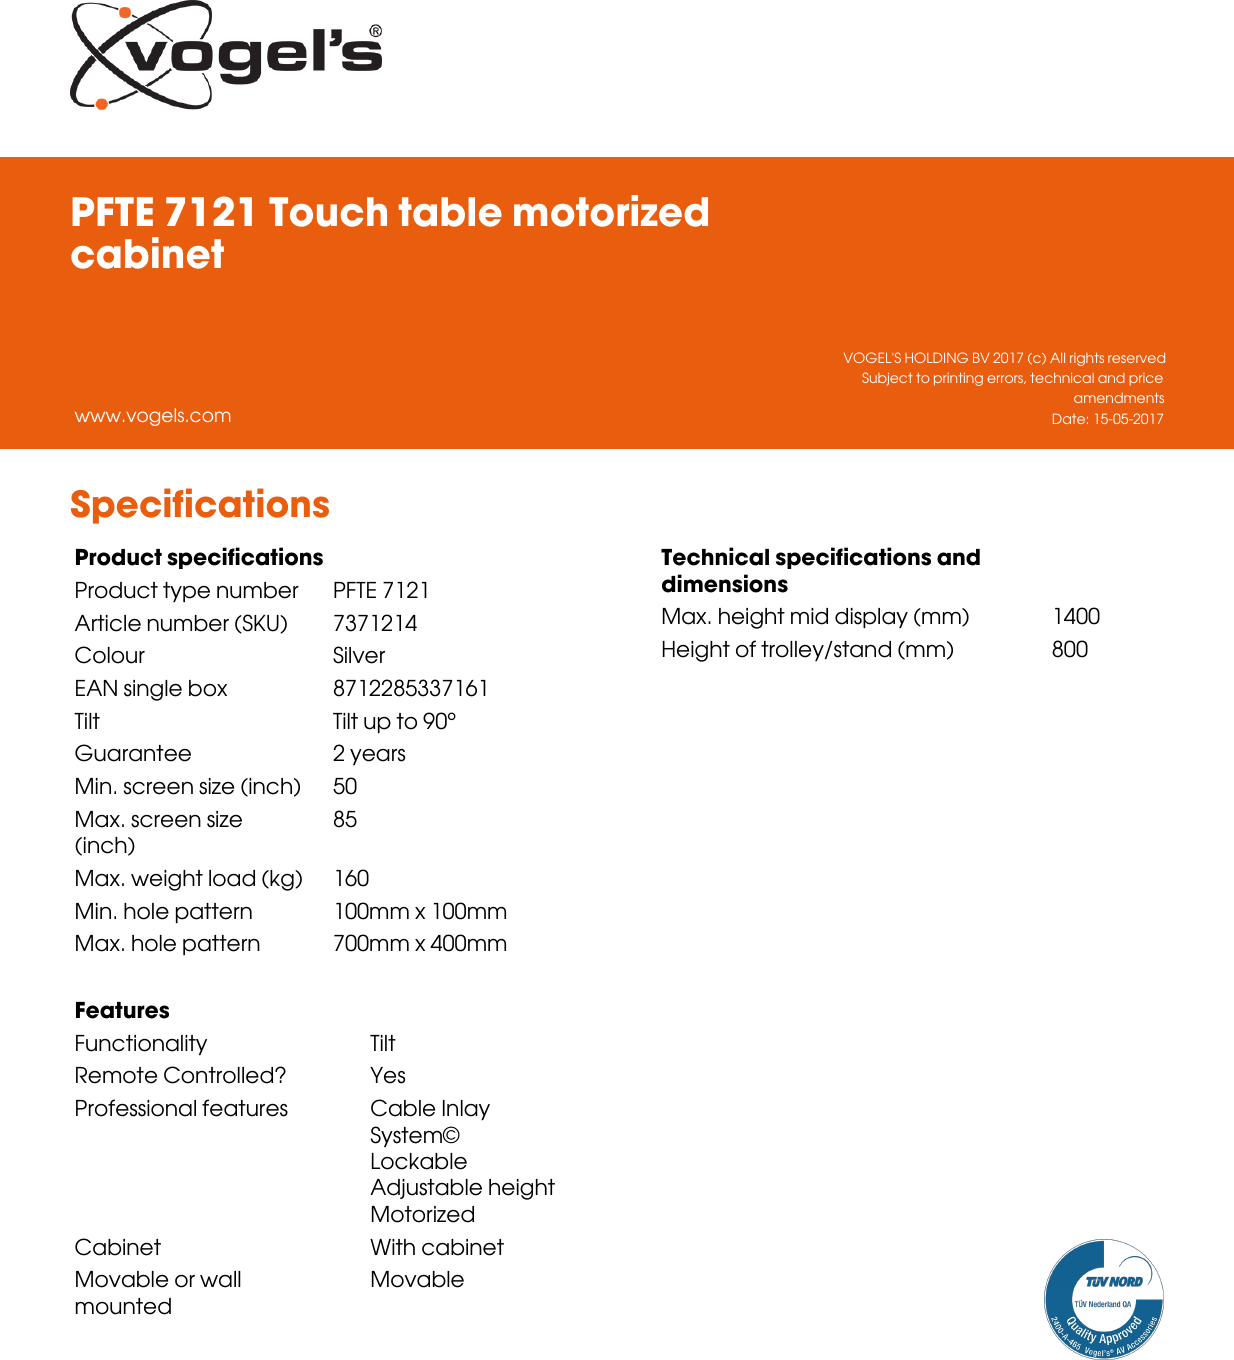 Page 4 of 4 - Leaflet Version 4.0  PFTE-7121-Touch-table-motorized-cabinet-5391-en